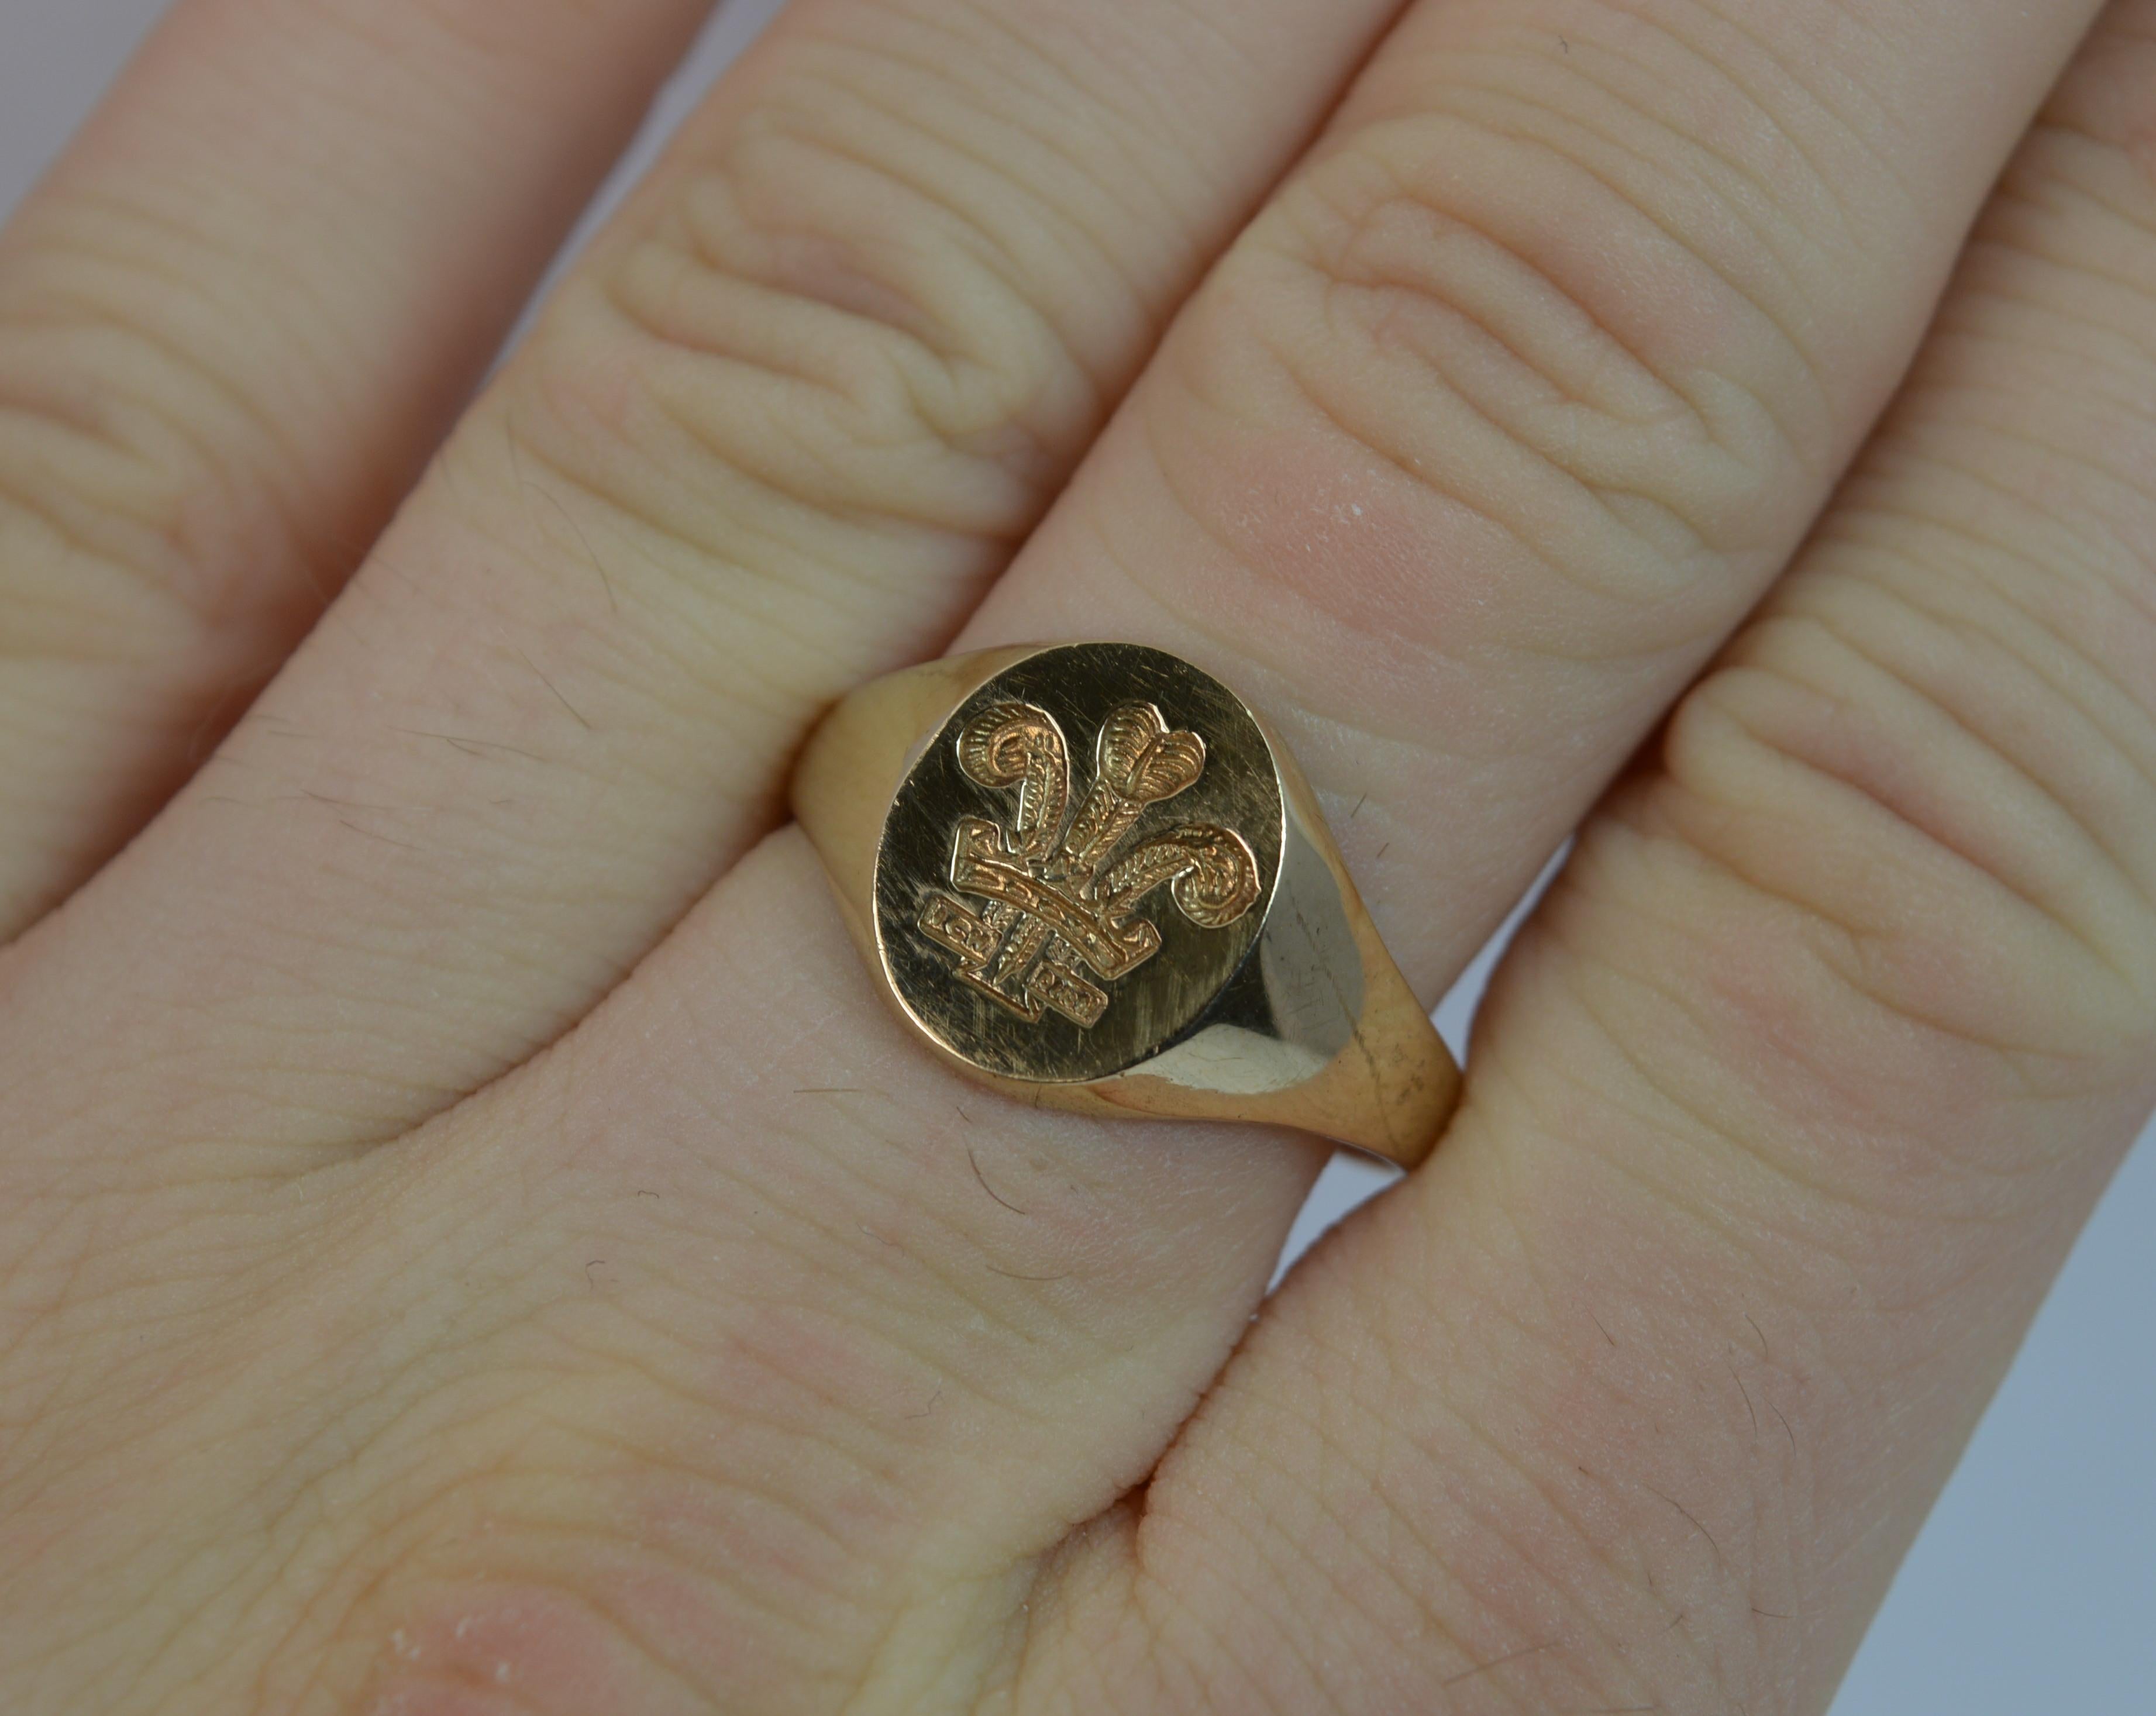 
A stylish mens or ladies signet ring.

Solid 9 carat yellow gold band.

Engraved with a Prince of Wales three feather intaglio design.

11mm x 13mm signet head.

CONDITION ; Very good. Strong, round band. Clean intaglio. Light wear. Please view